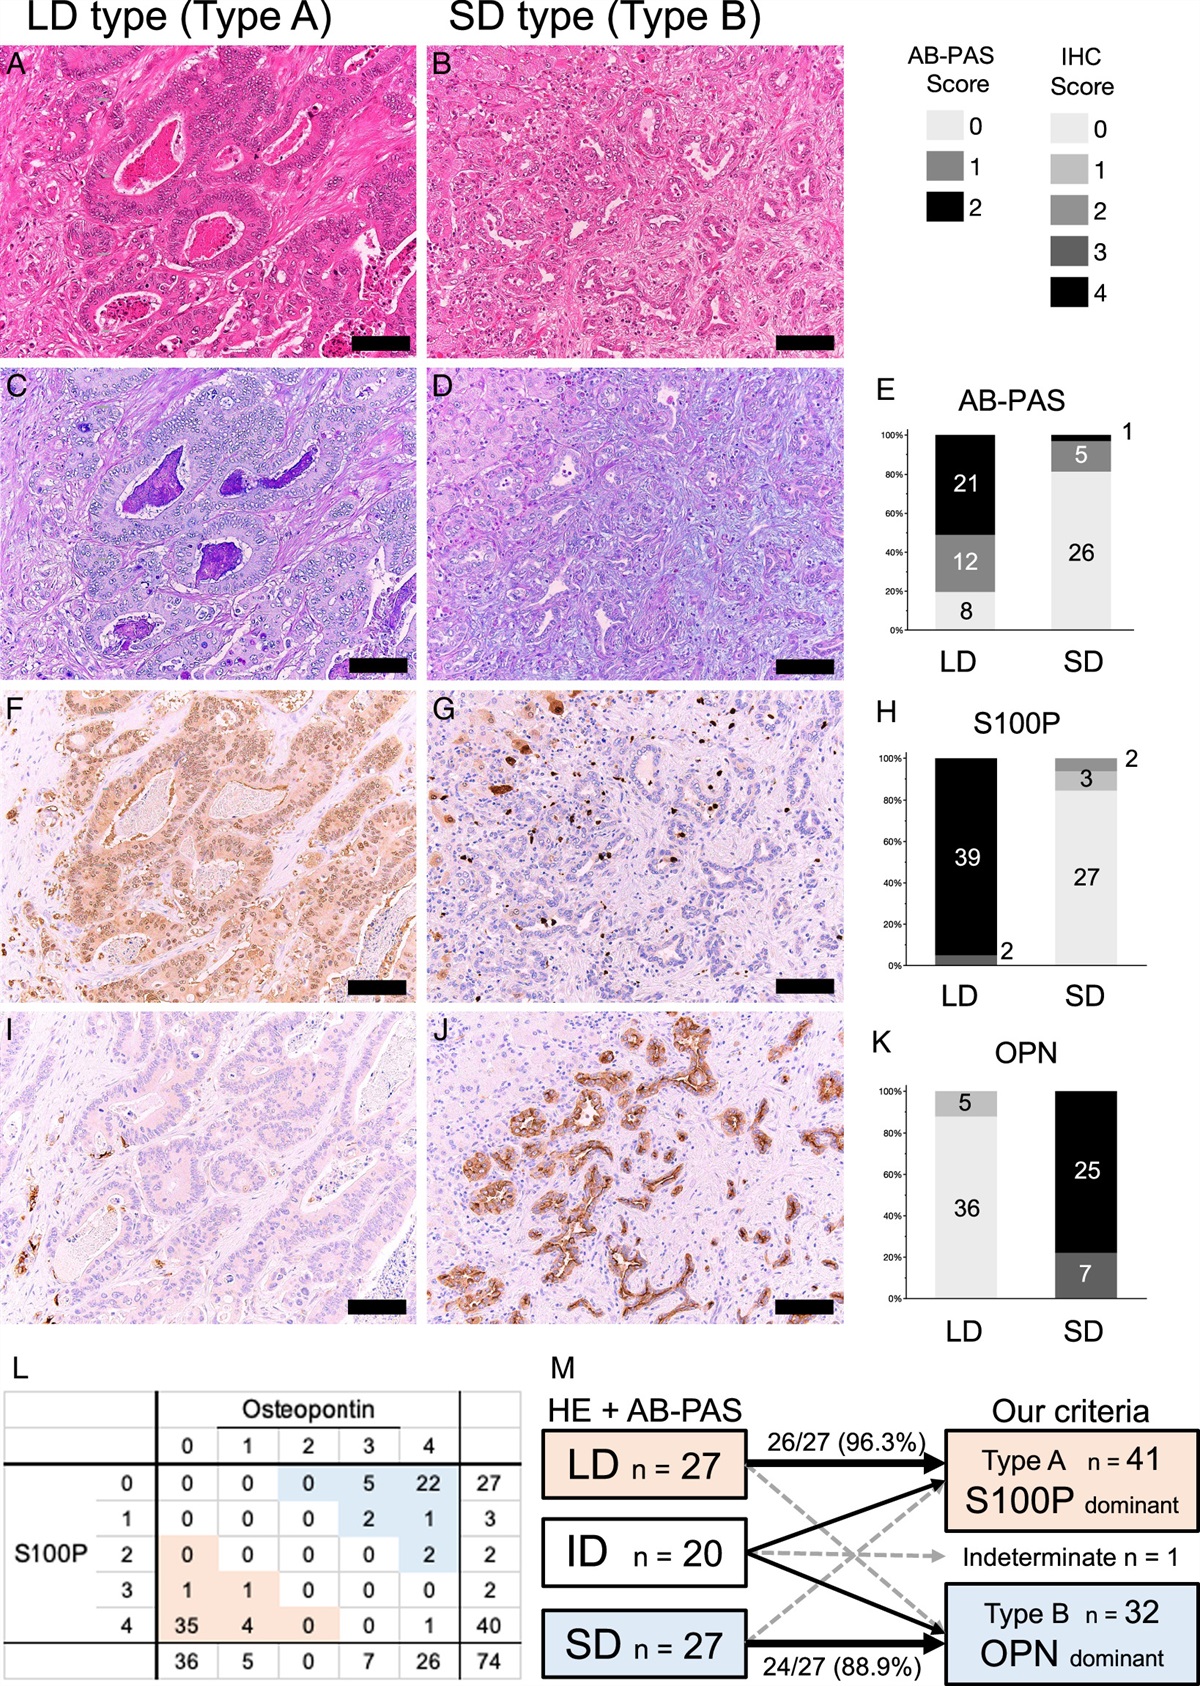 An Immunohistochemical Analysis of Osteopontin and S100 Calcium-binding Protein P is Useful for Subclassifying Large- and Small-duct Type Intrahepatic Cholangiocarcinomas